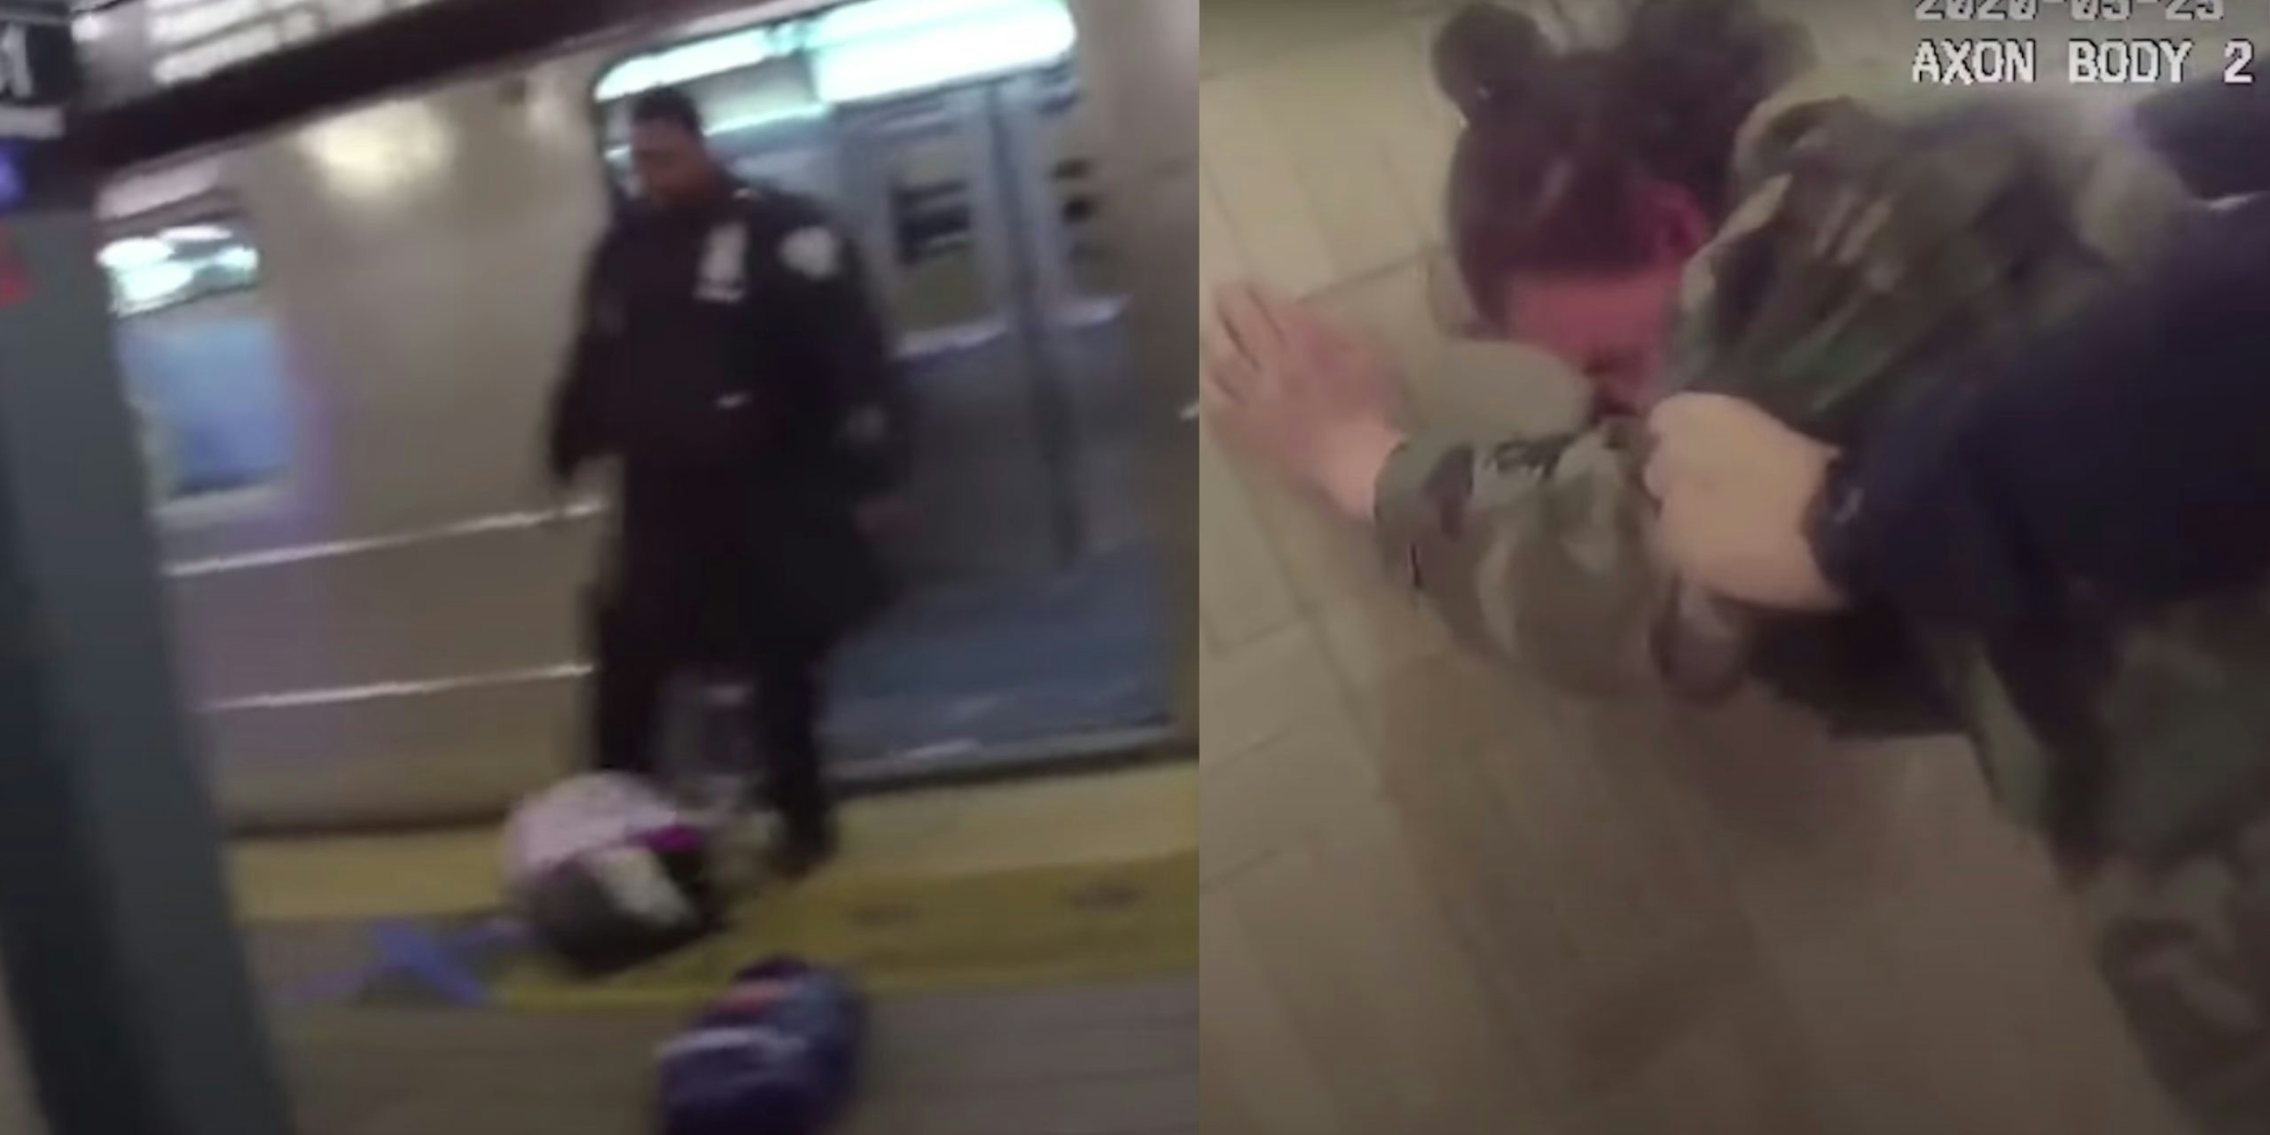 screenshots show a NYPD officer kicking the homeless man's belongings and a cop pushing him against the wall